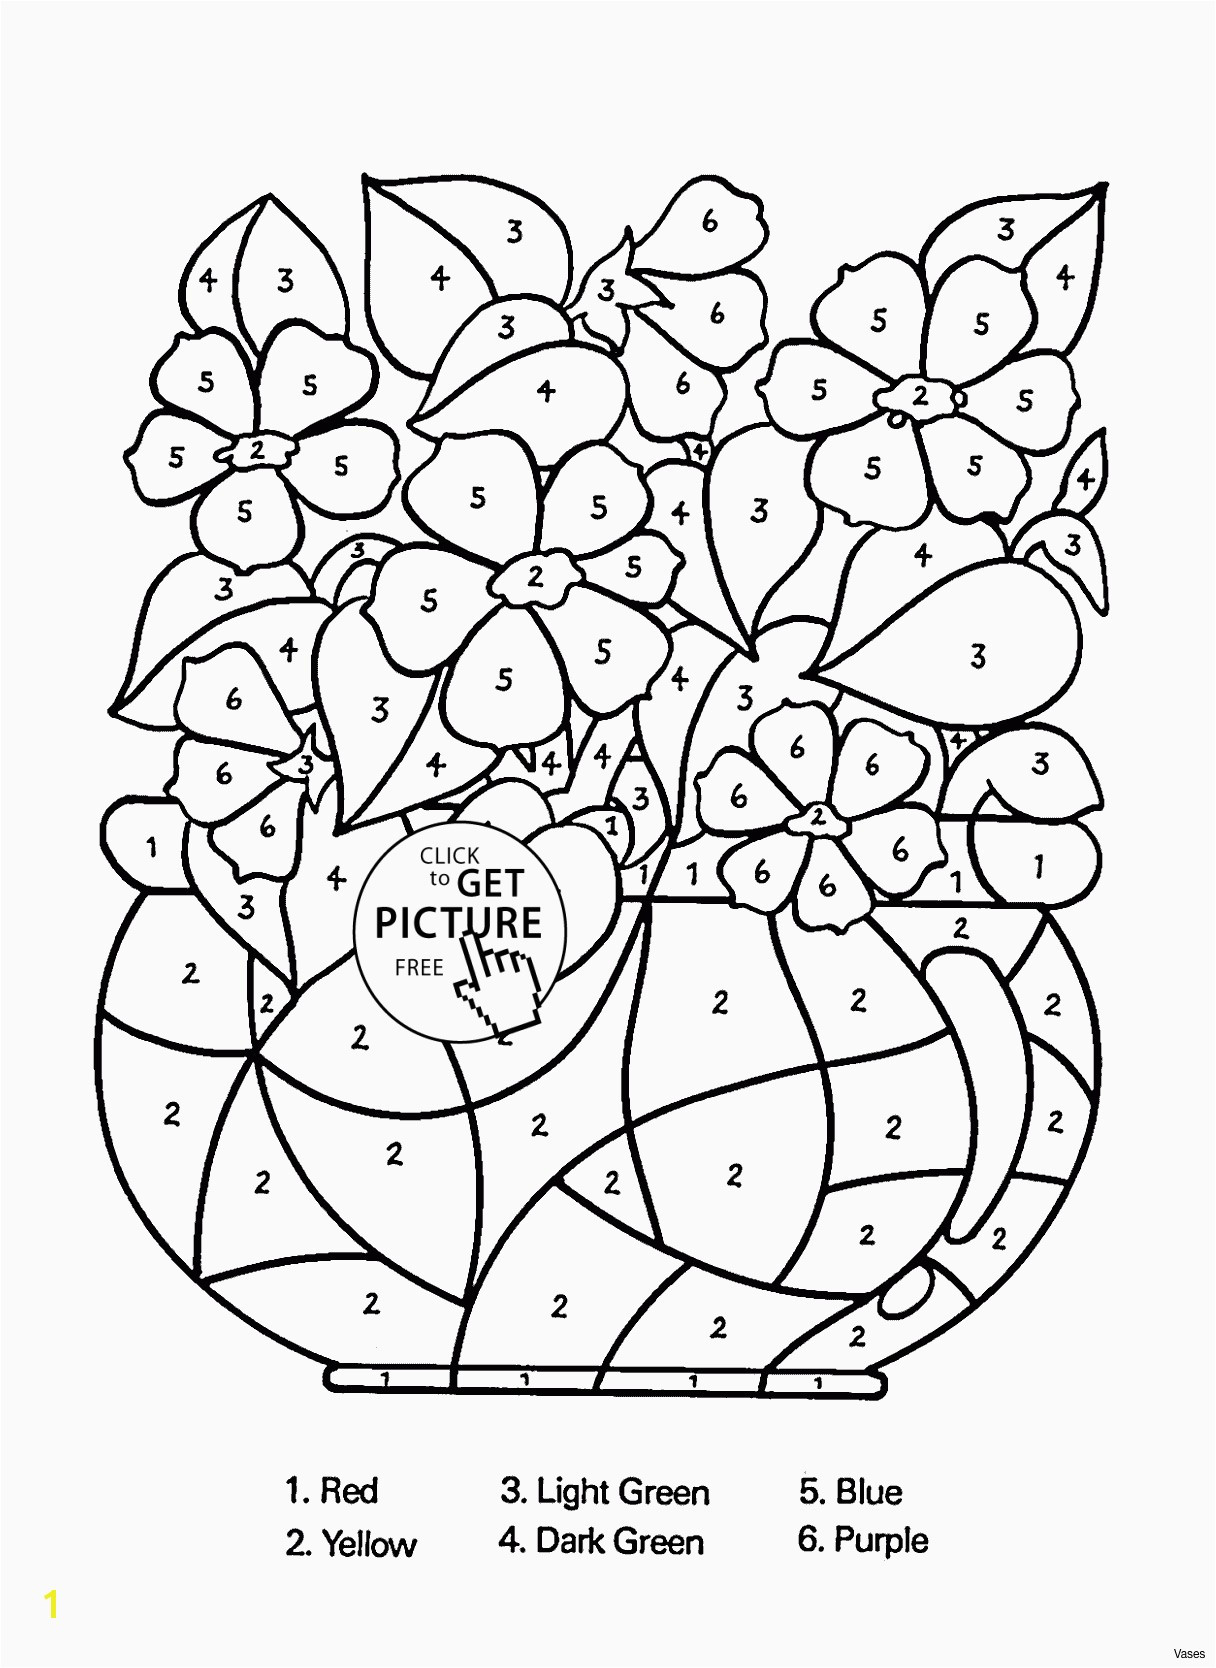 17 Famous How to Make A Flower Vase at Home 2024 free download how to make a flower vase at home of flower images coloring pages zabelyesayan com within flower images coloring pages vases flower vase coloring page pages flowers in a top i 0d